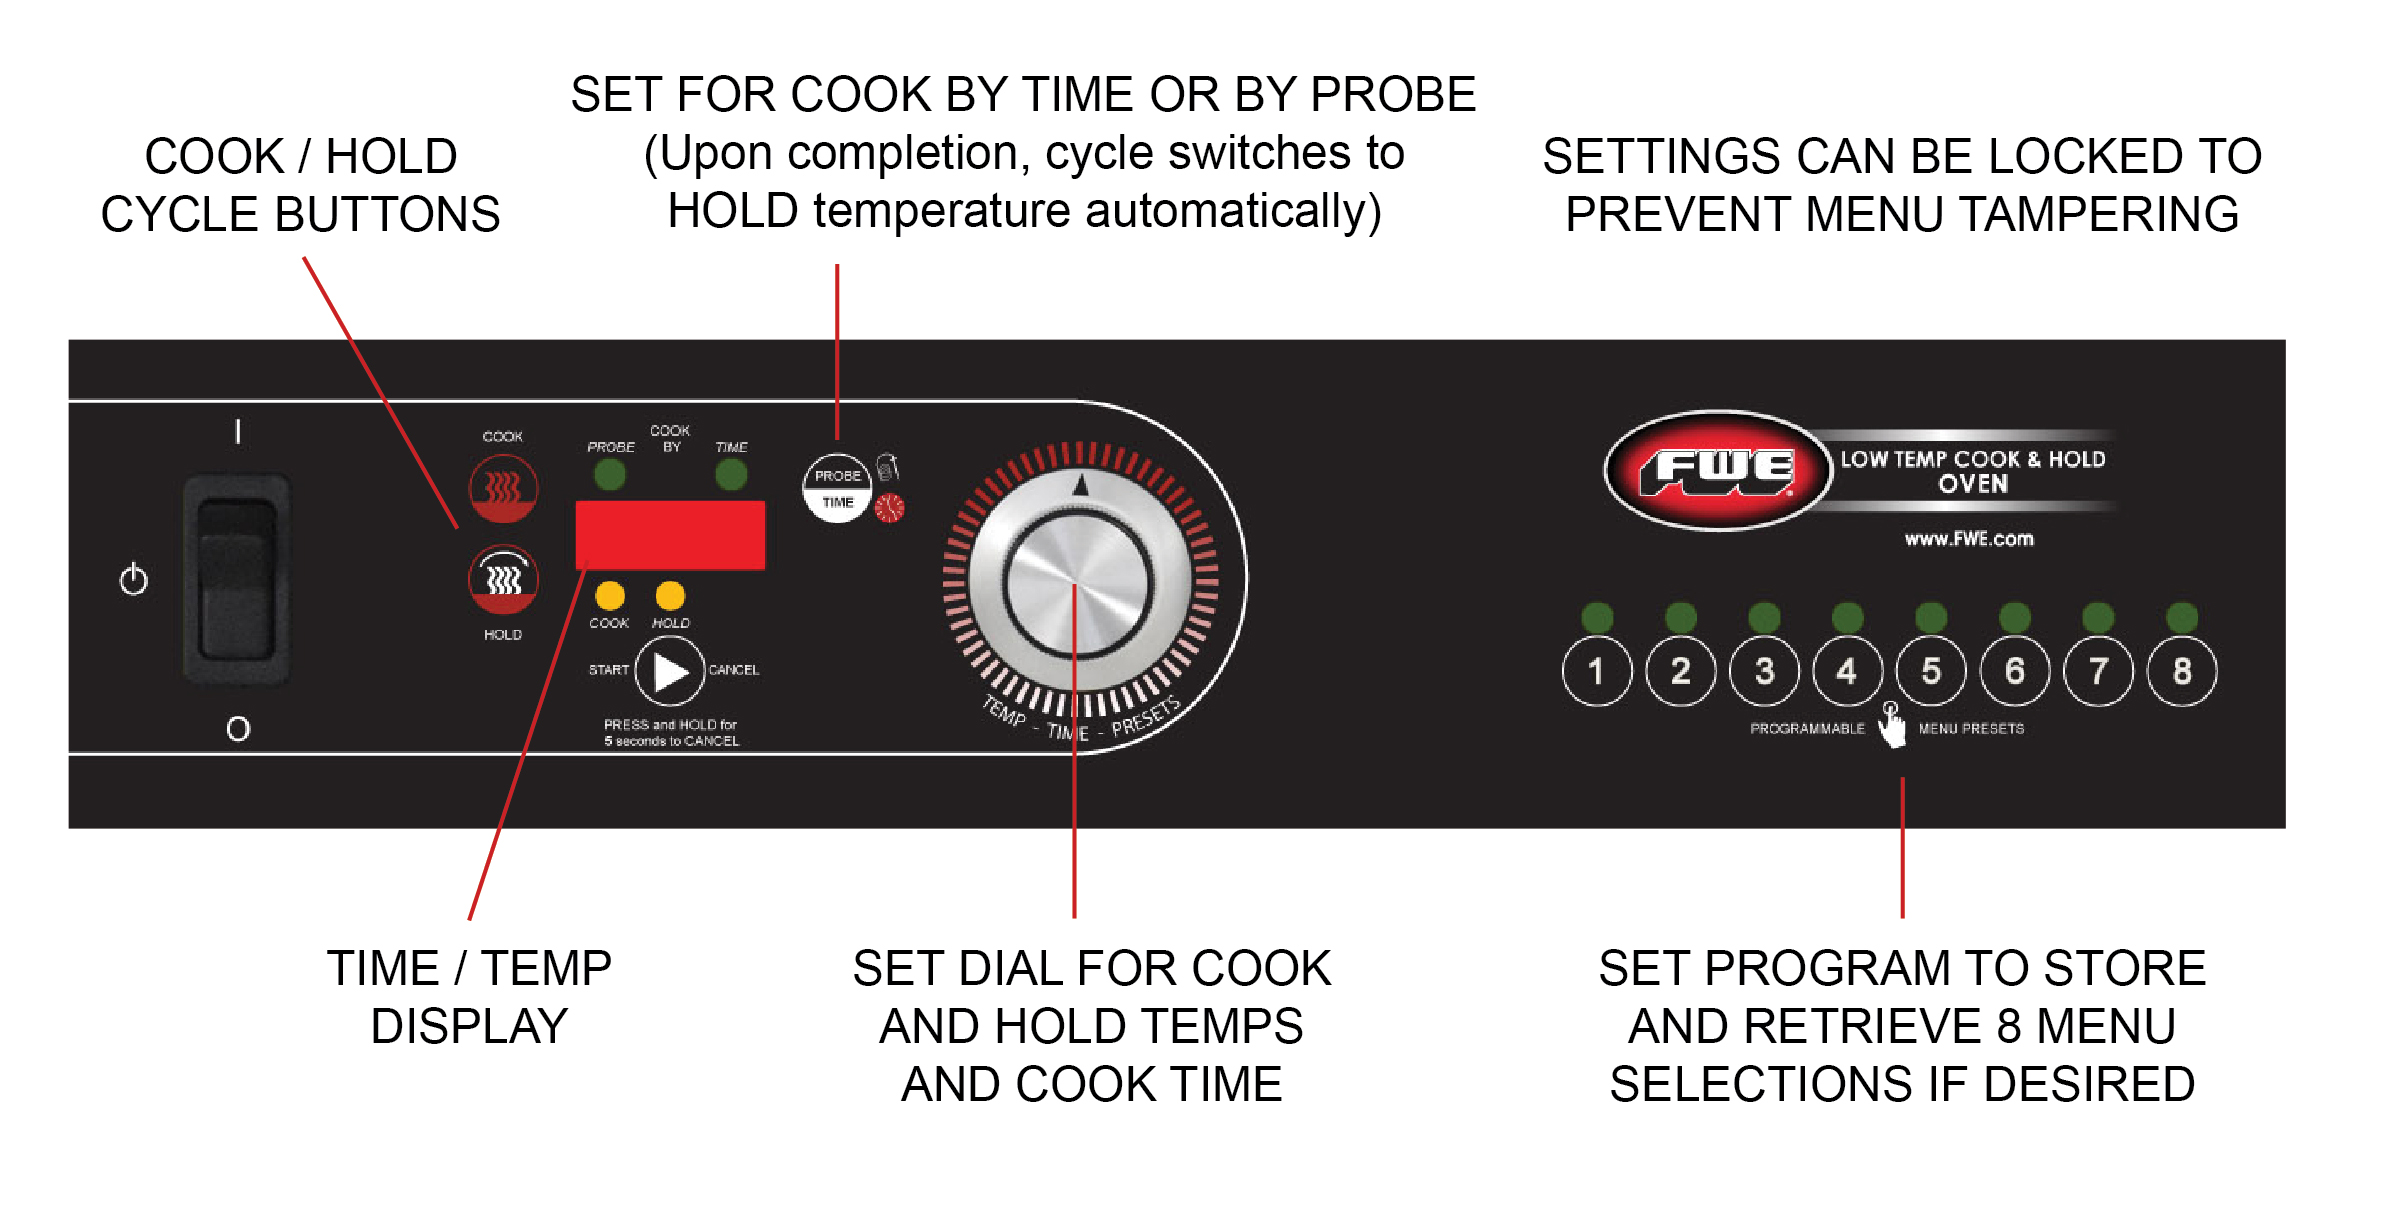 Low Temp Cook & Hold Ovens (with 8 button preset) Control Panel Diagram